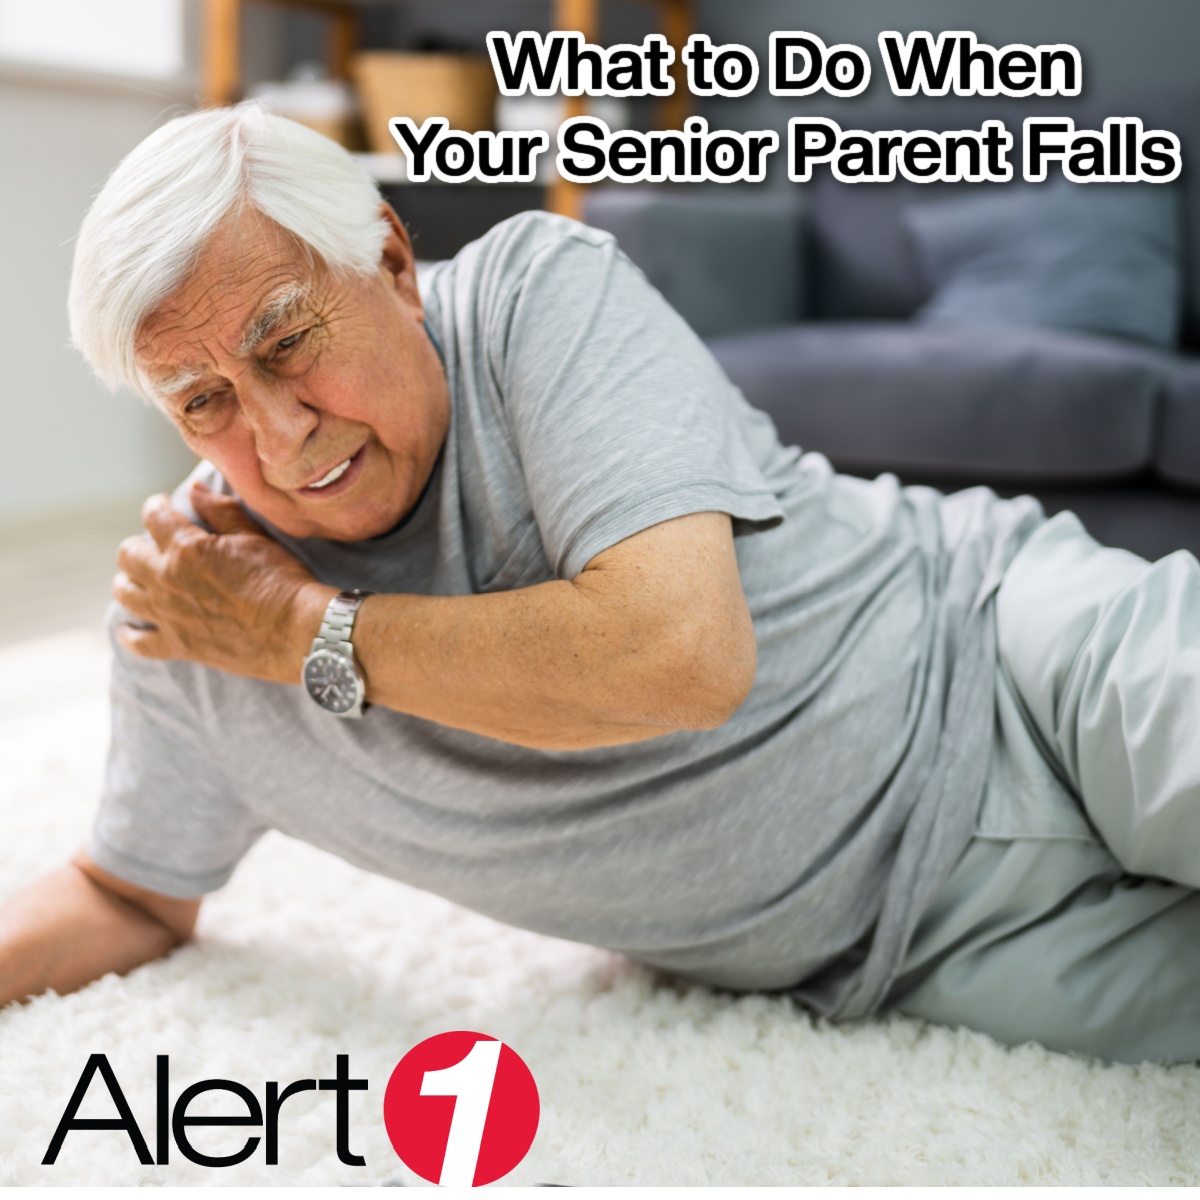 It's every adult child's nighmare-- to hear that your senior parent fell and got hurt. Check out our #tips to learn what to do and how to prevent falls here: bit.ly/3Kk6e9H

#fallprevention #adultchildren #familycaregivers #aginginplace